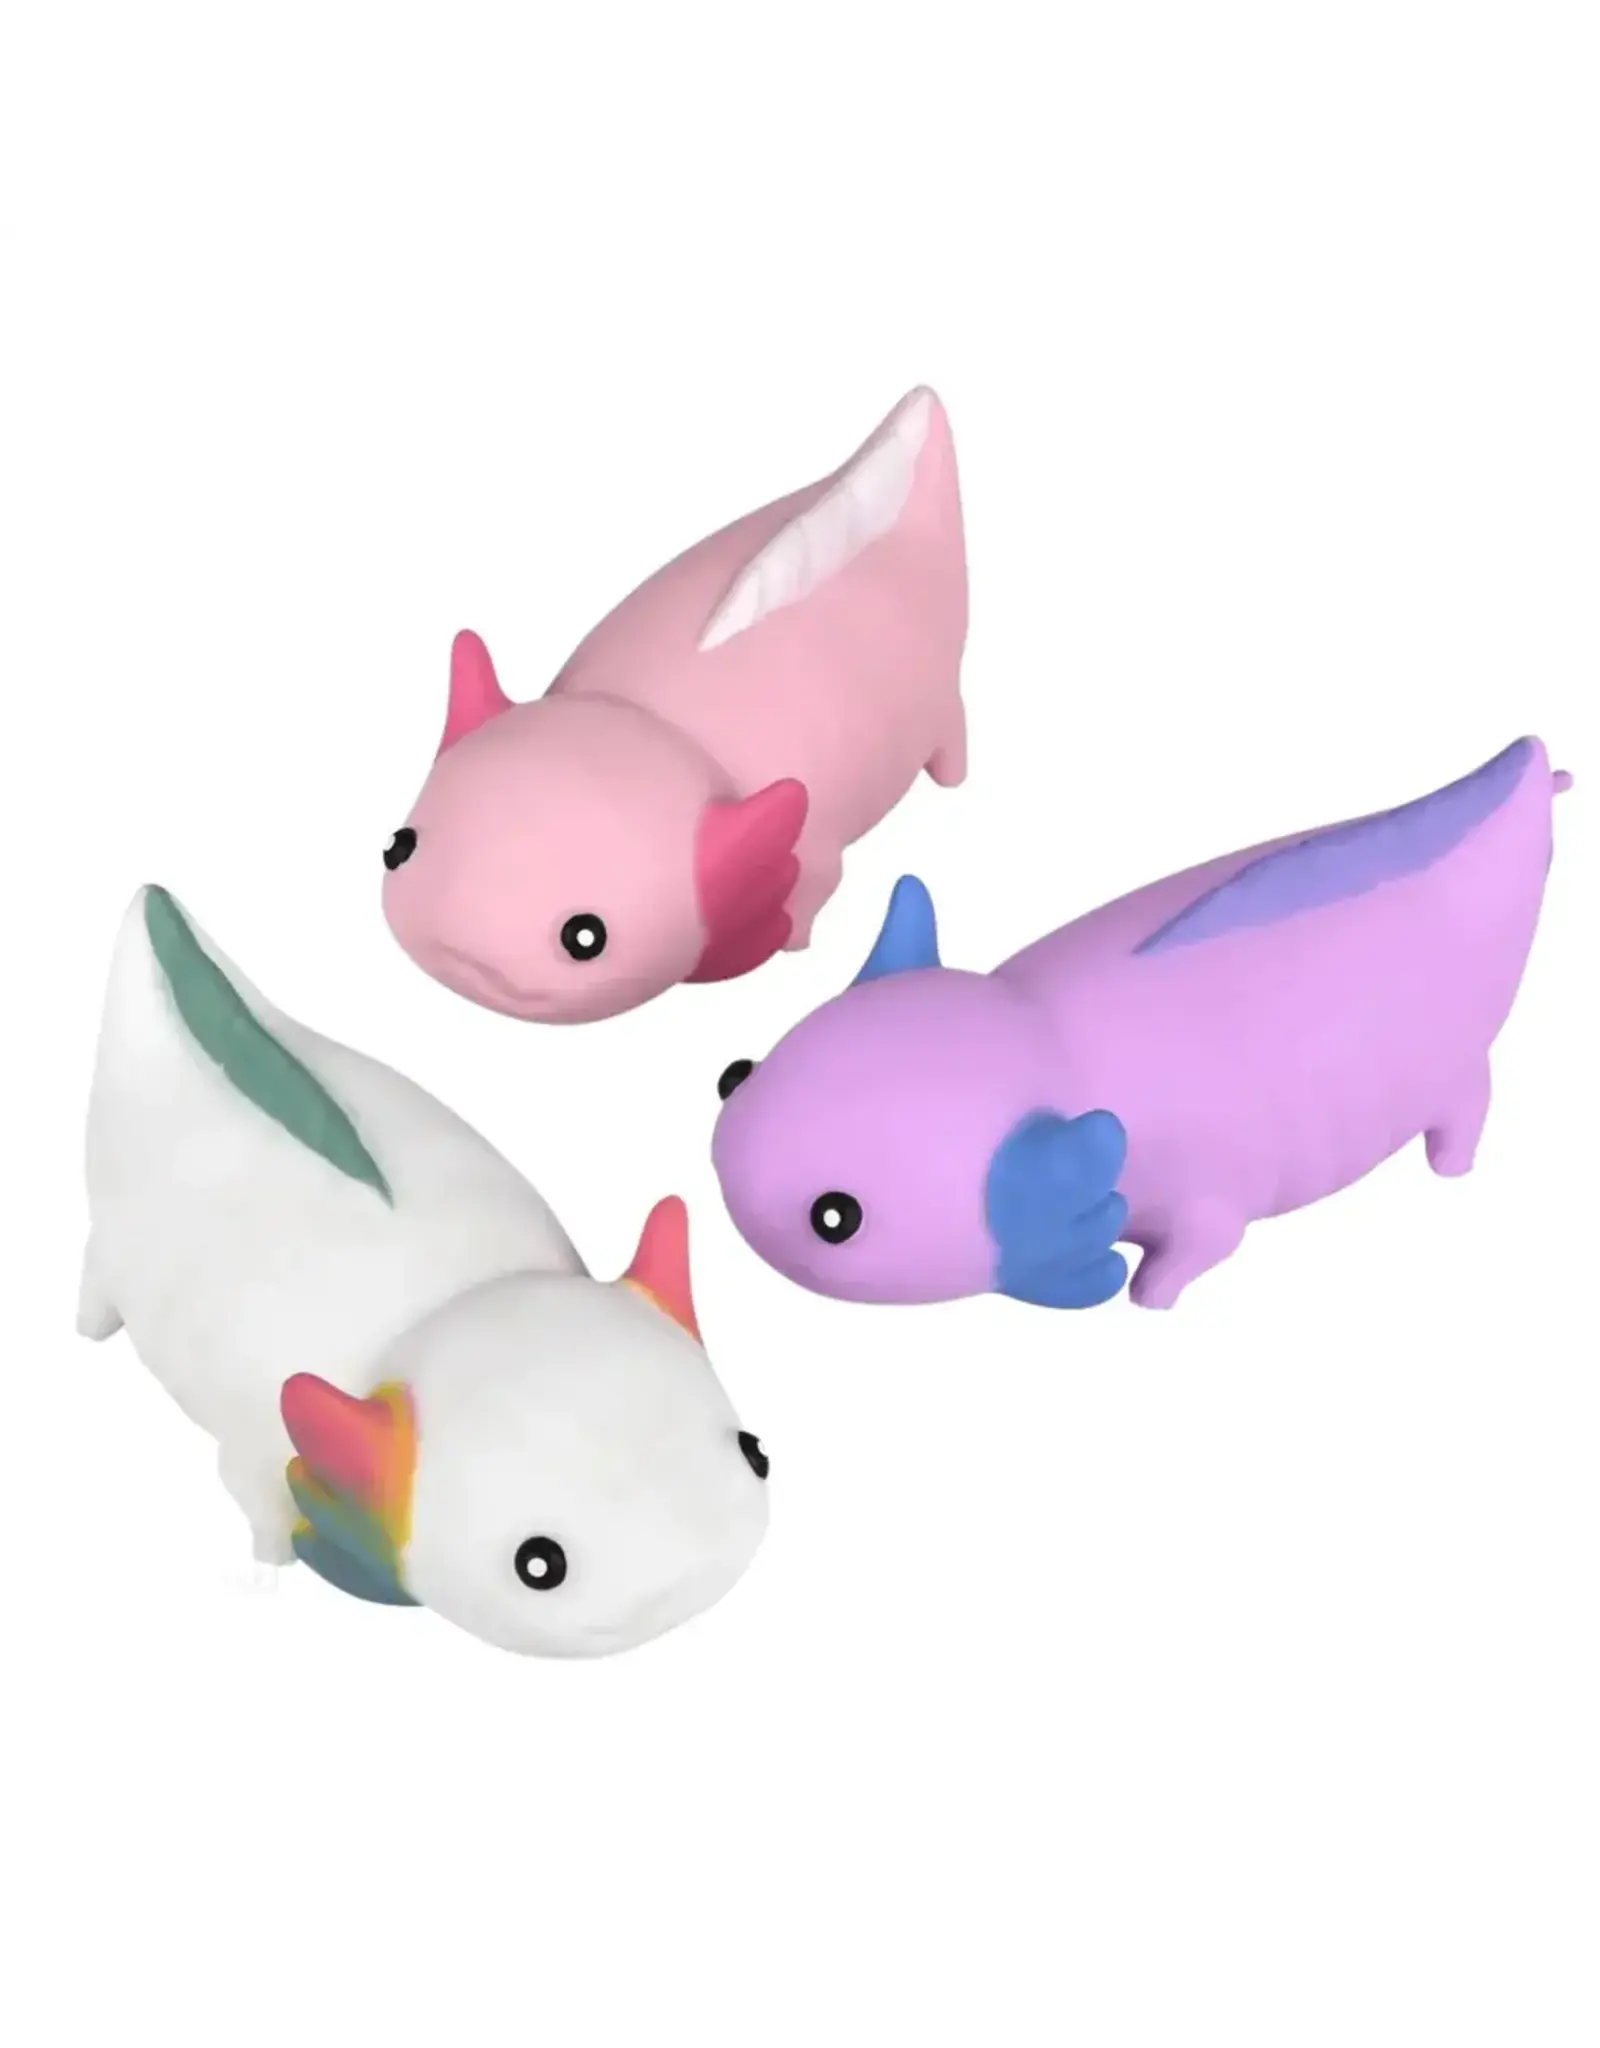 The Toy Network Stretchy Sand Axolotl